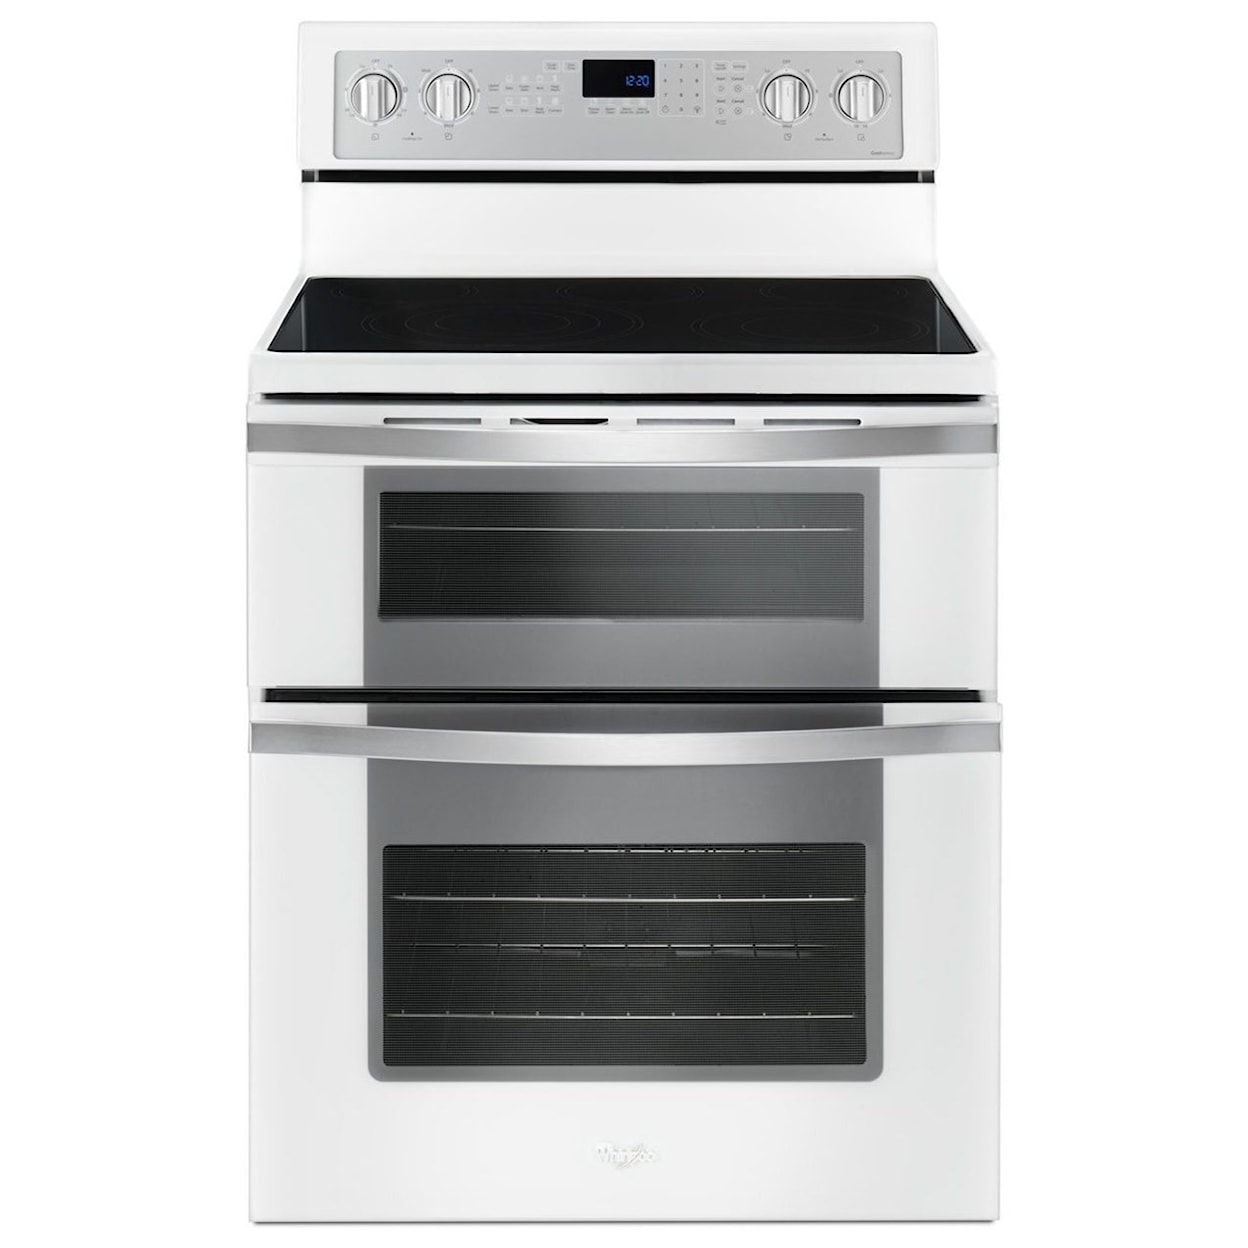 Whirlpool Electric Ranges 6.7 Cu. Ft. Electric Double Oven Range with 